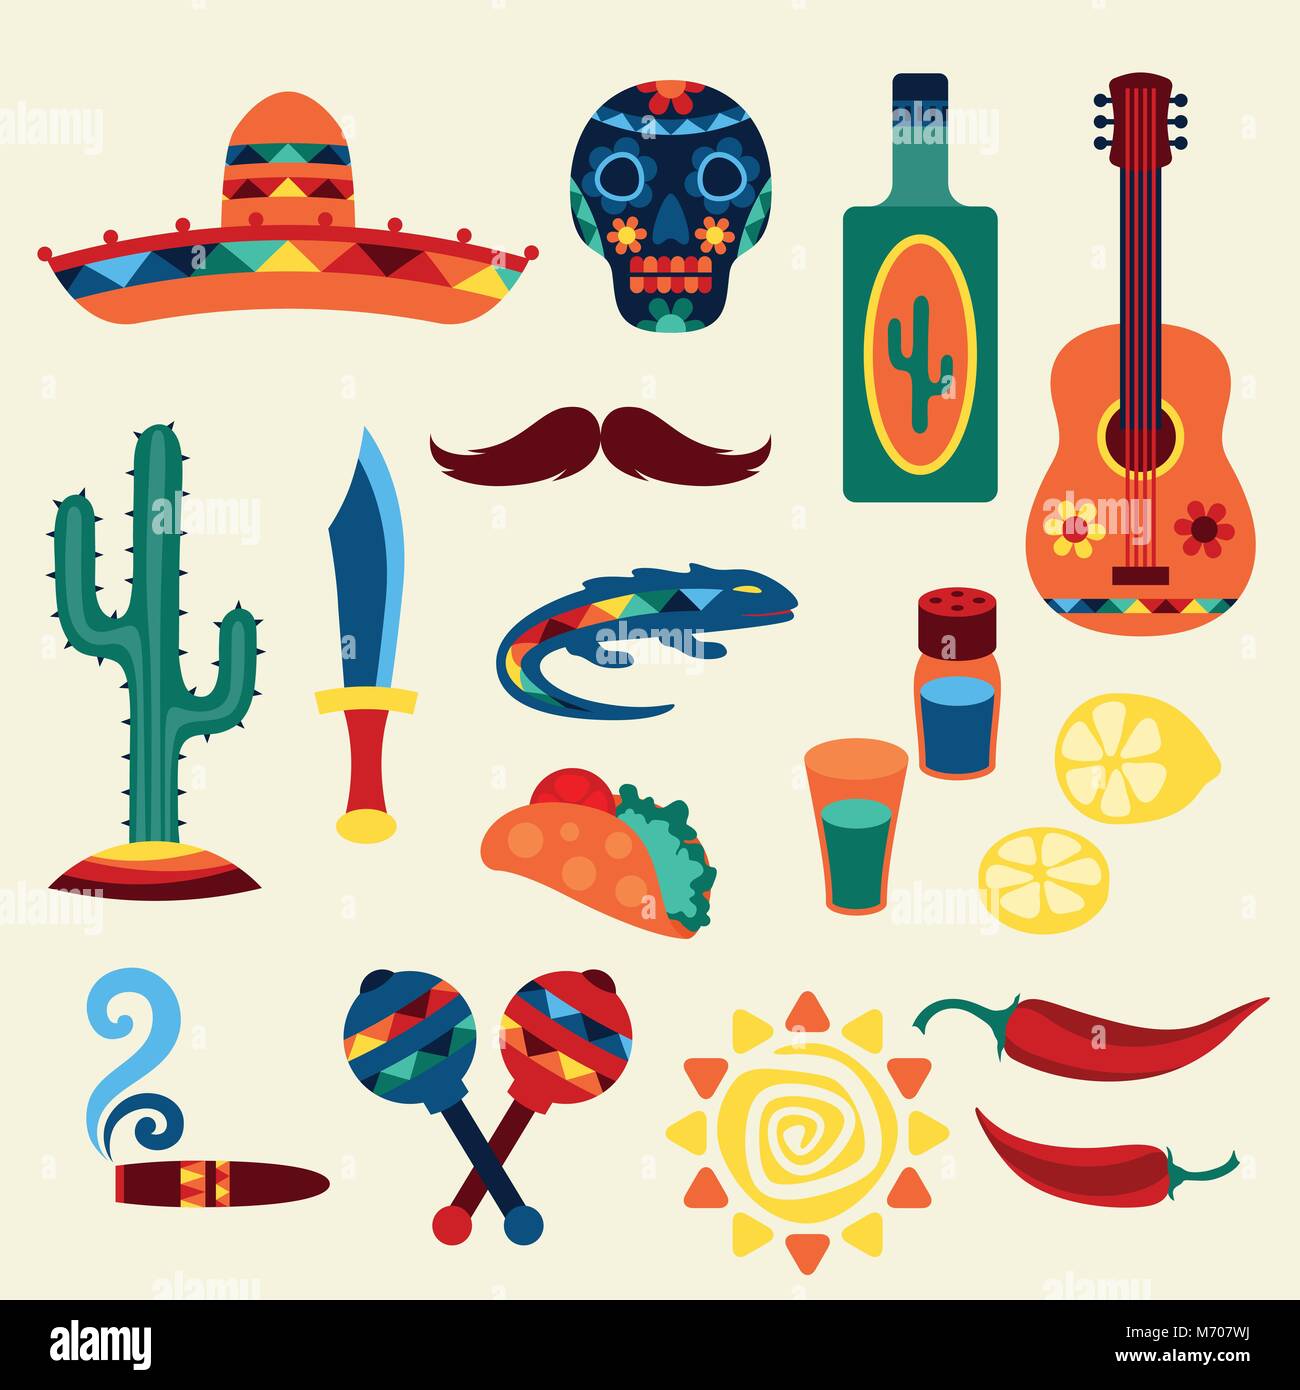 Collection of mexican icons in native style Stock Vector